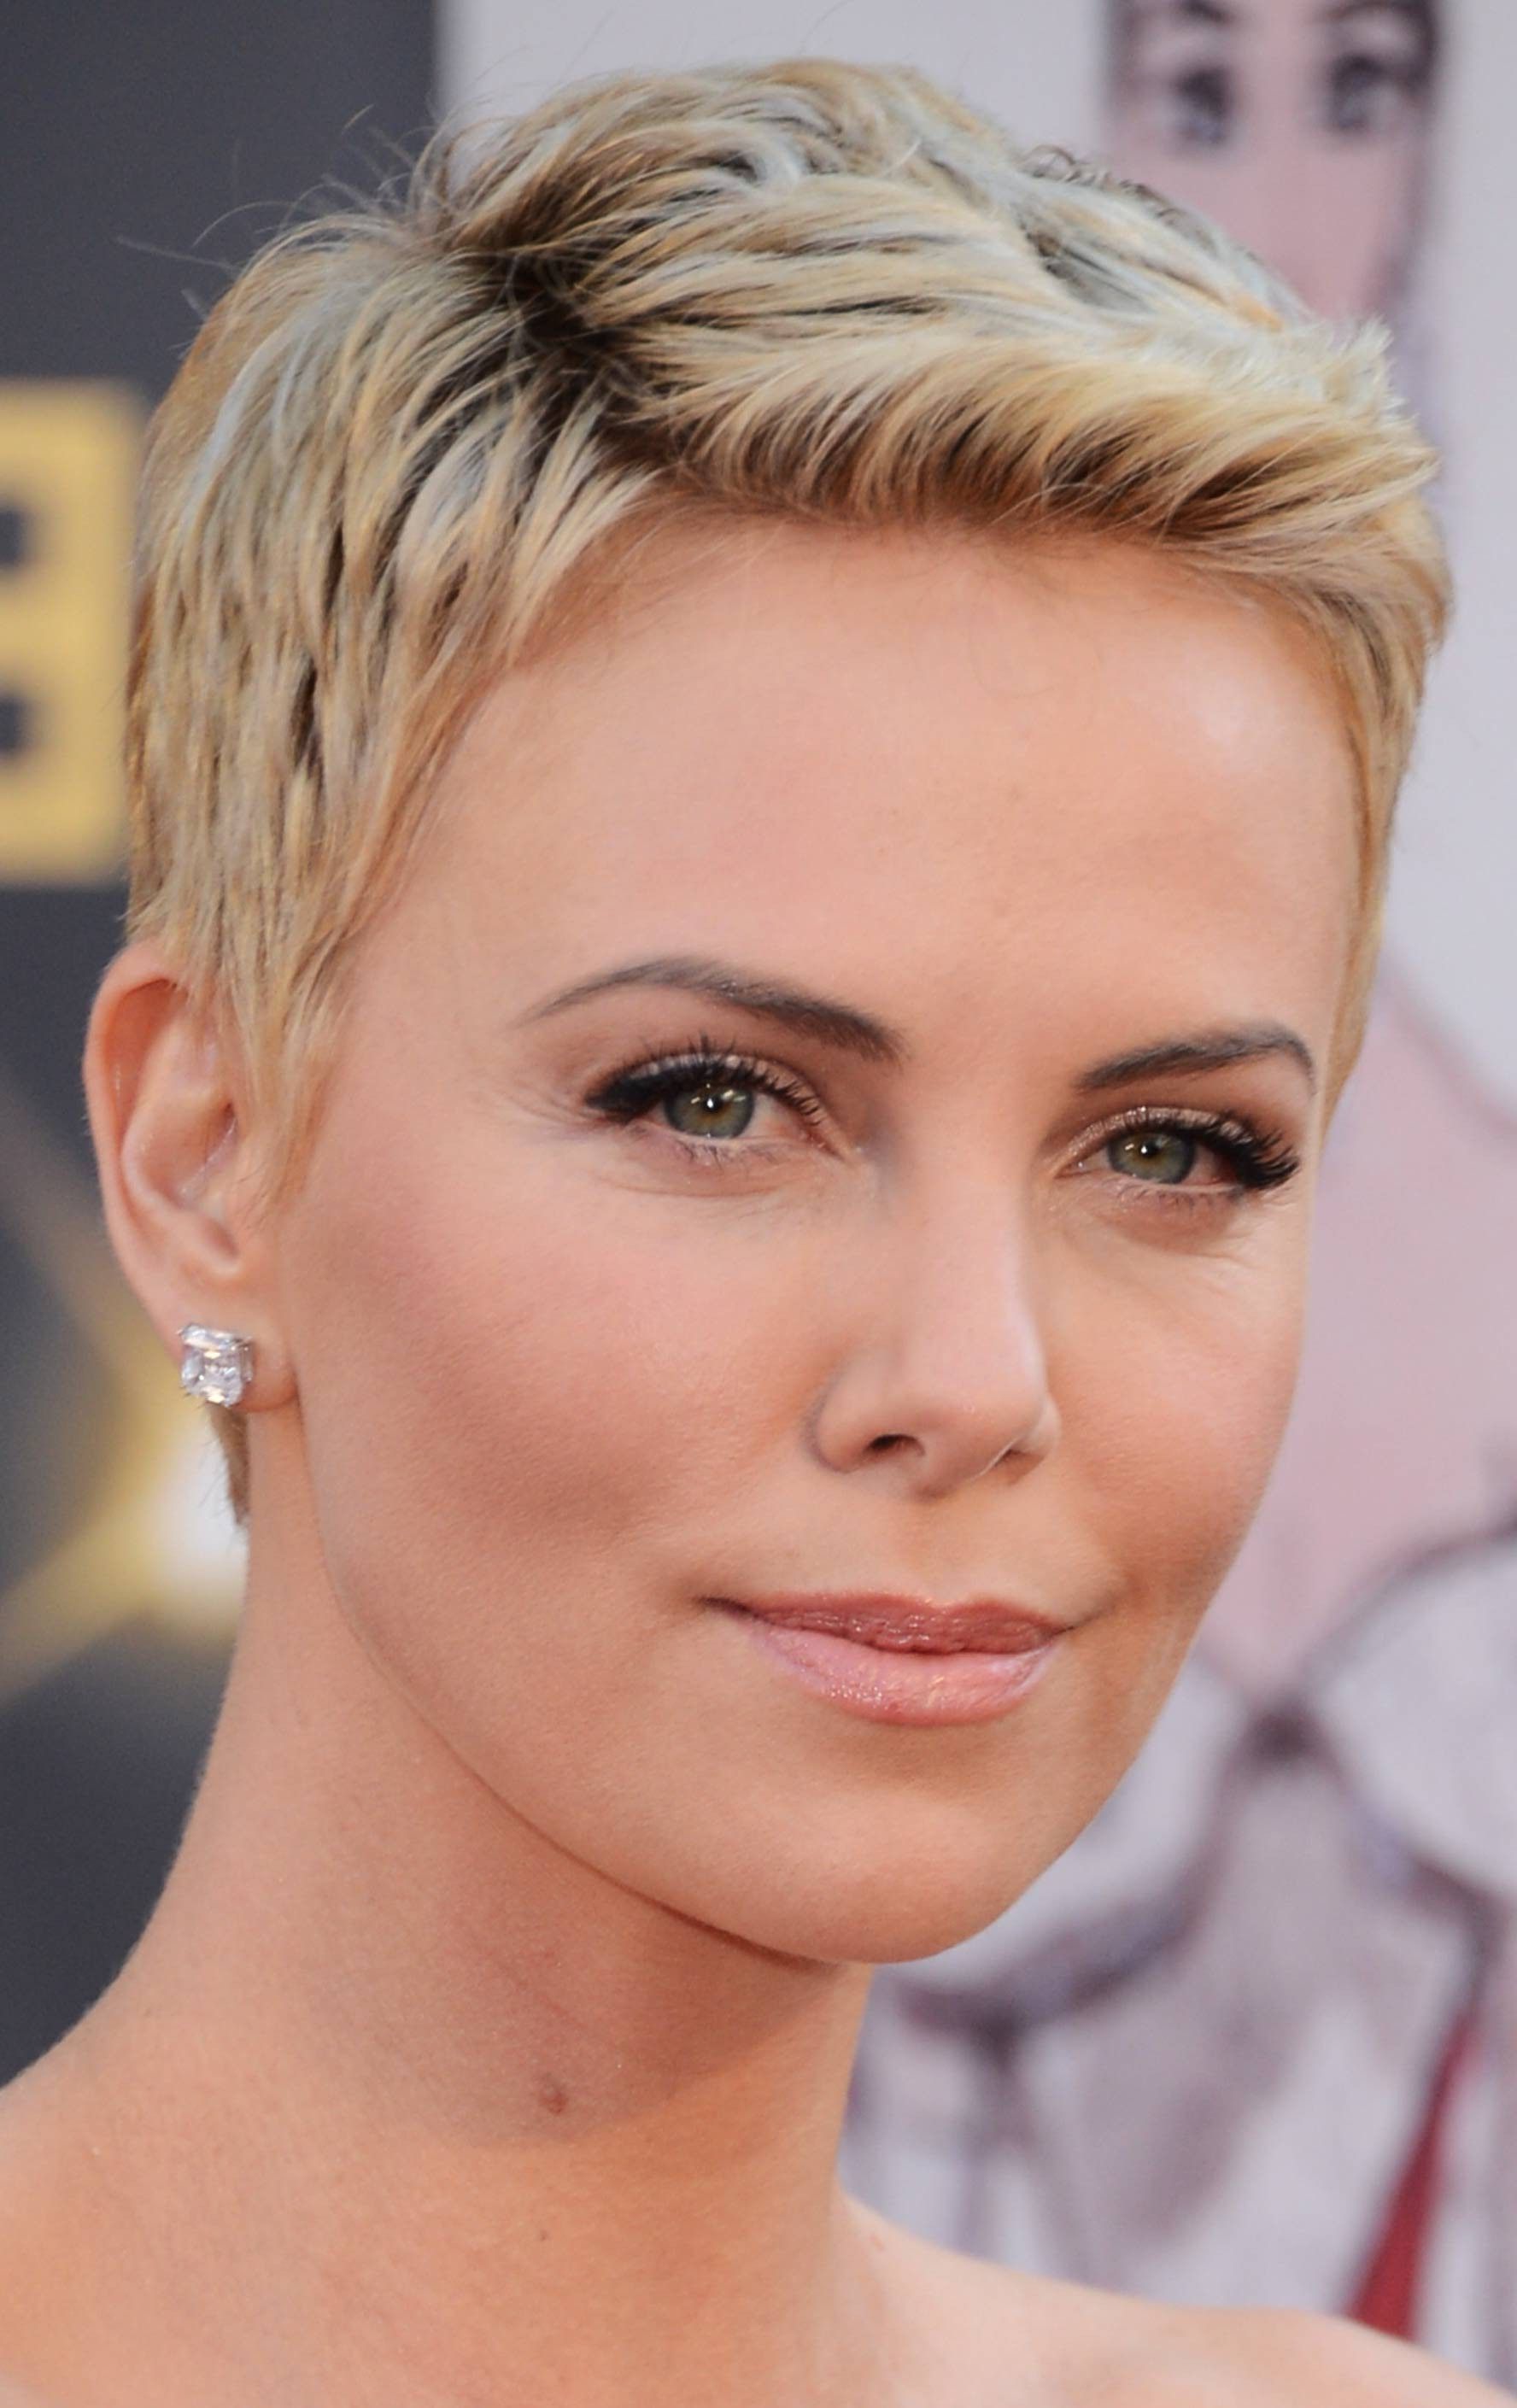 Short Hairstyles For People With Round Faces Beautiful Best Medium Regarding Medium Short Hairstyles Round Faces (View 11 of 25)